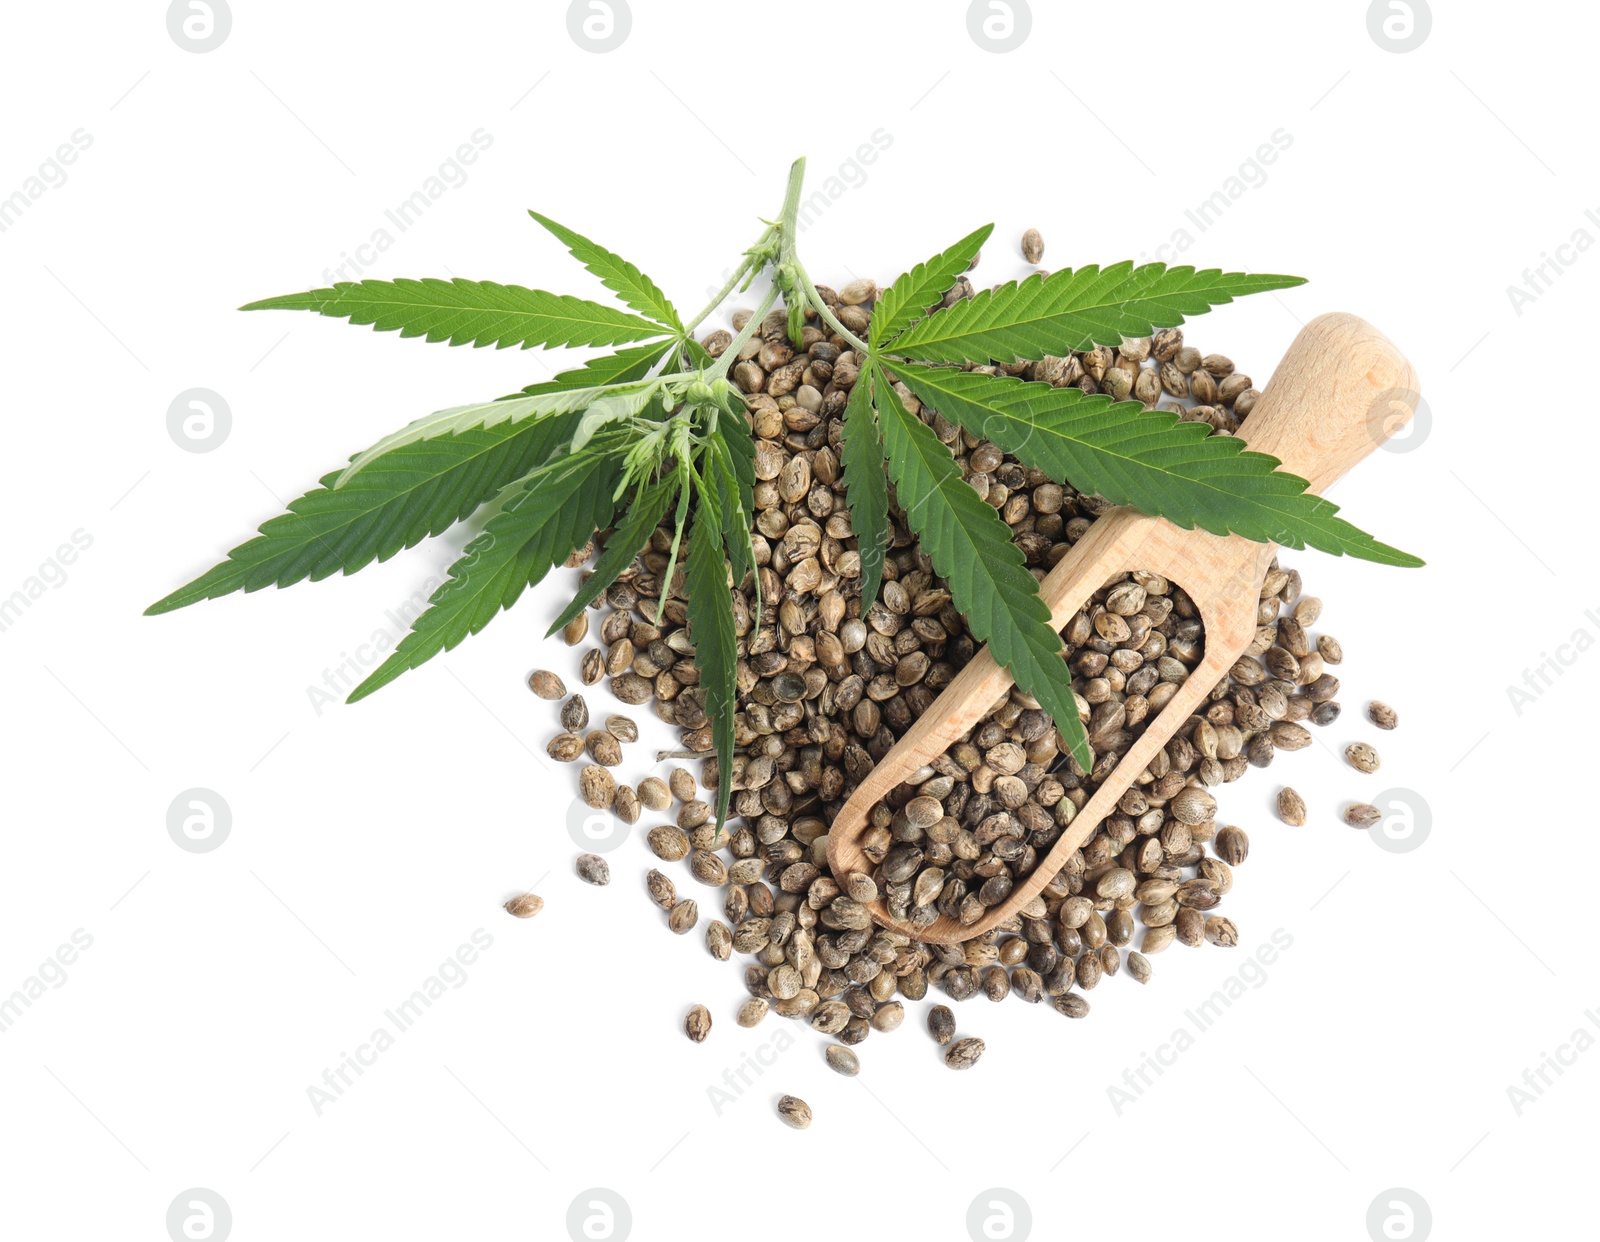 Photo of Wooden scoop, hemp seeds and leaves on white background, top view